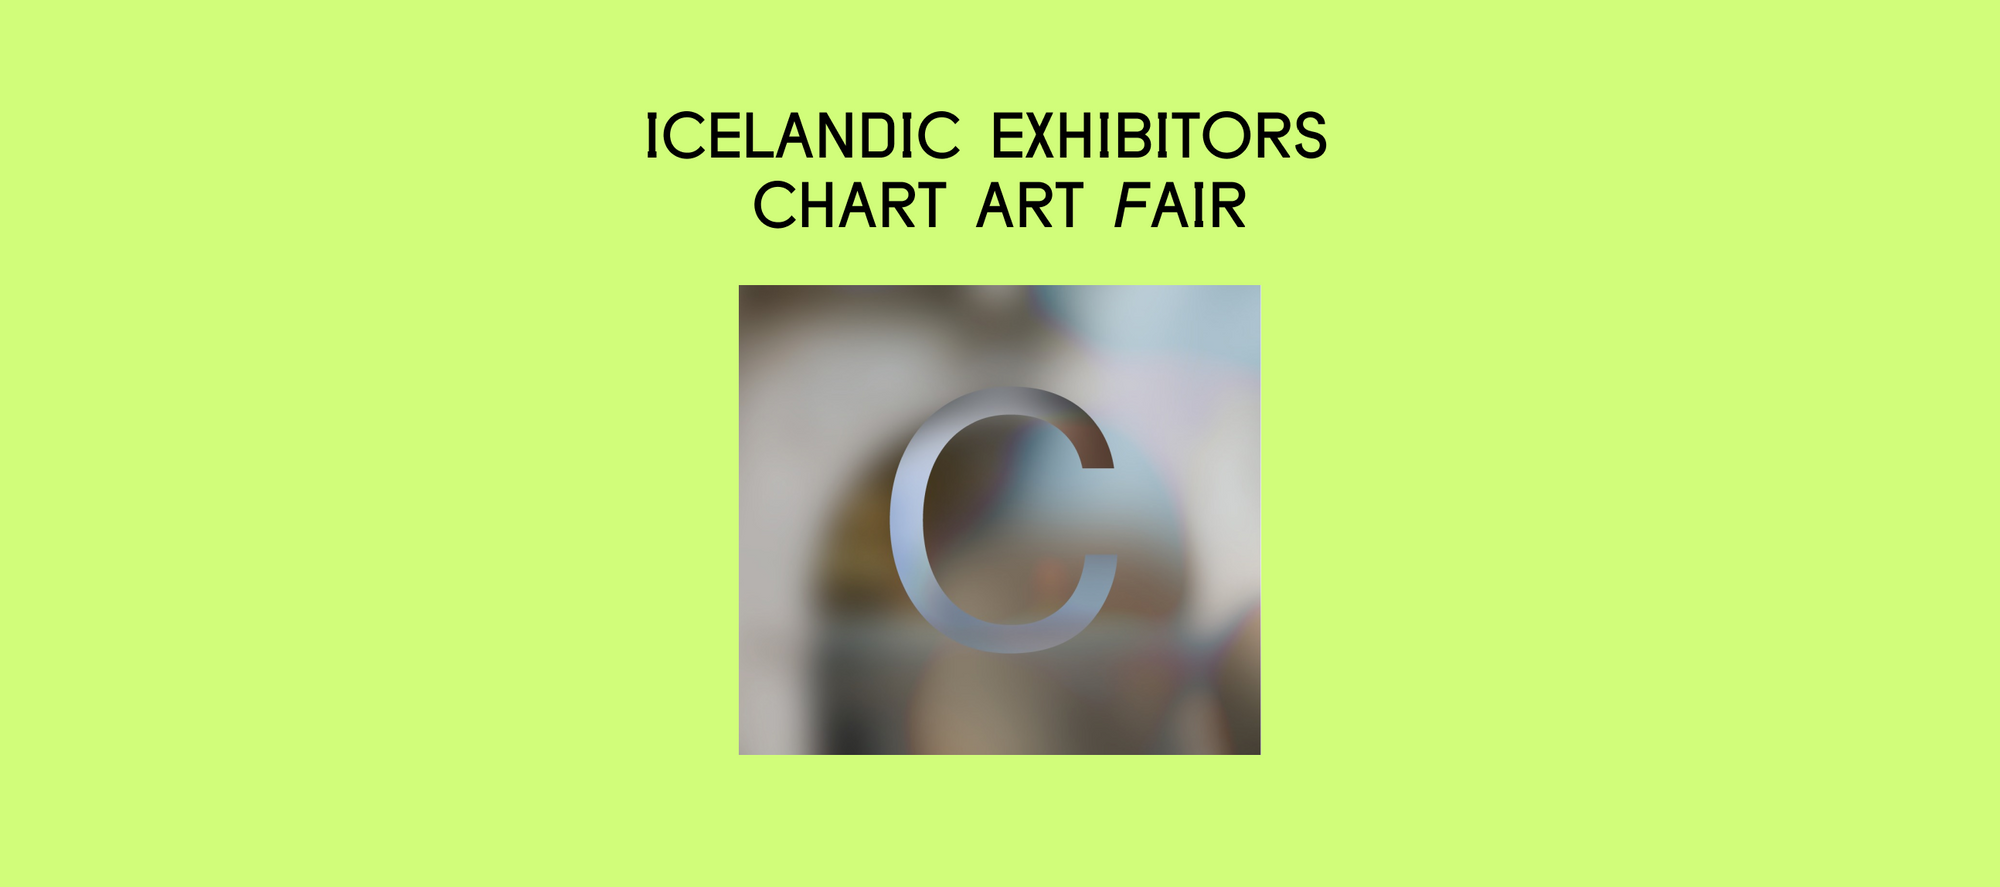 Chart Art Fair Exhibitors from Iceland this Weekend